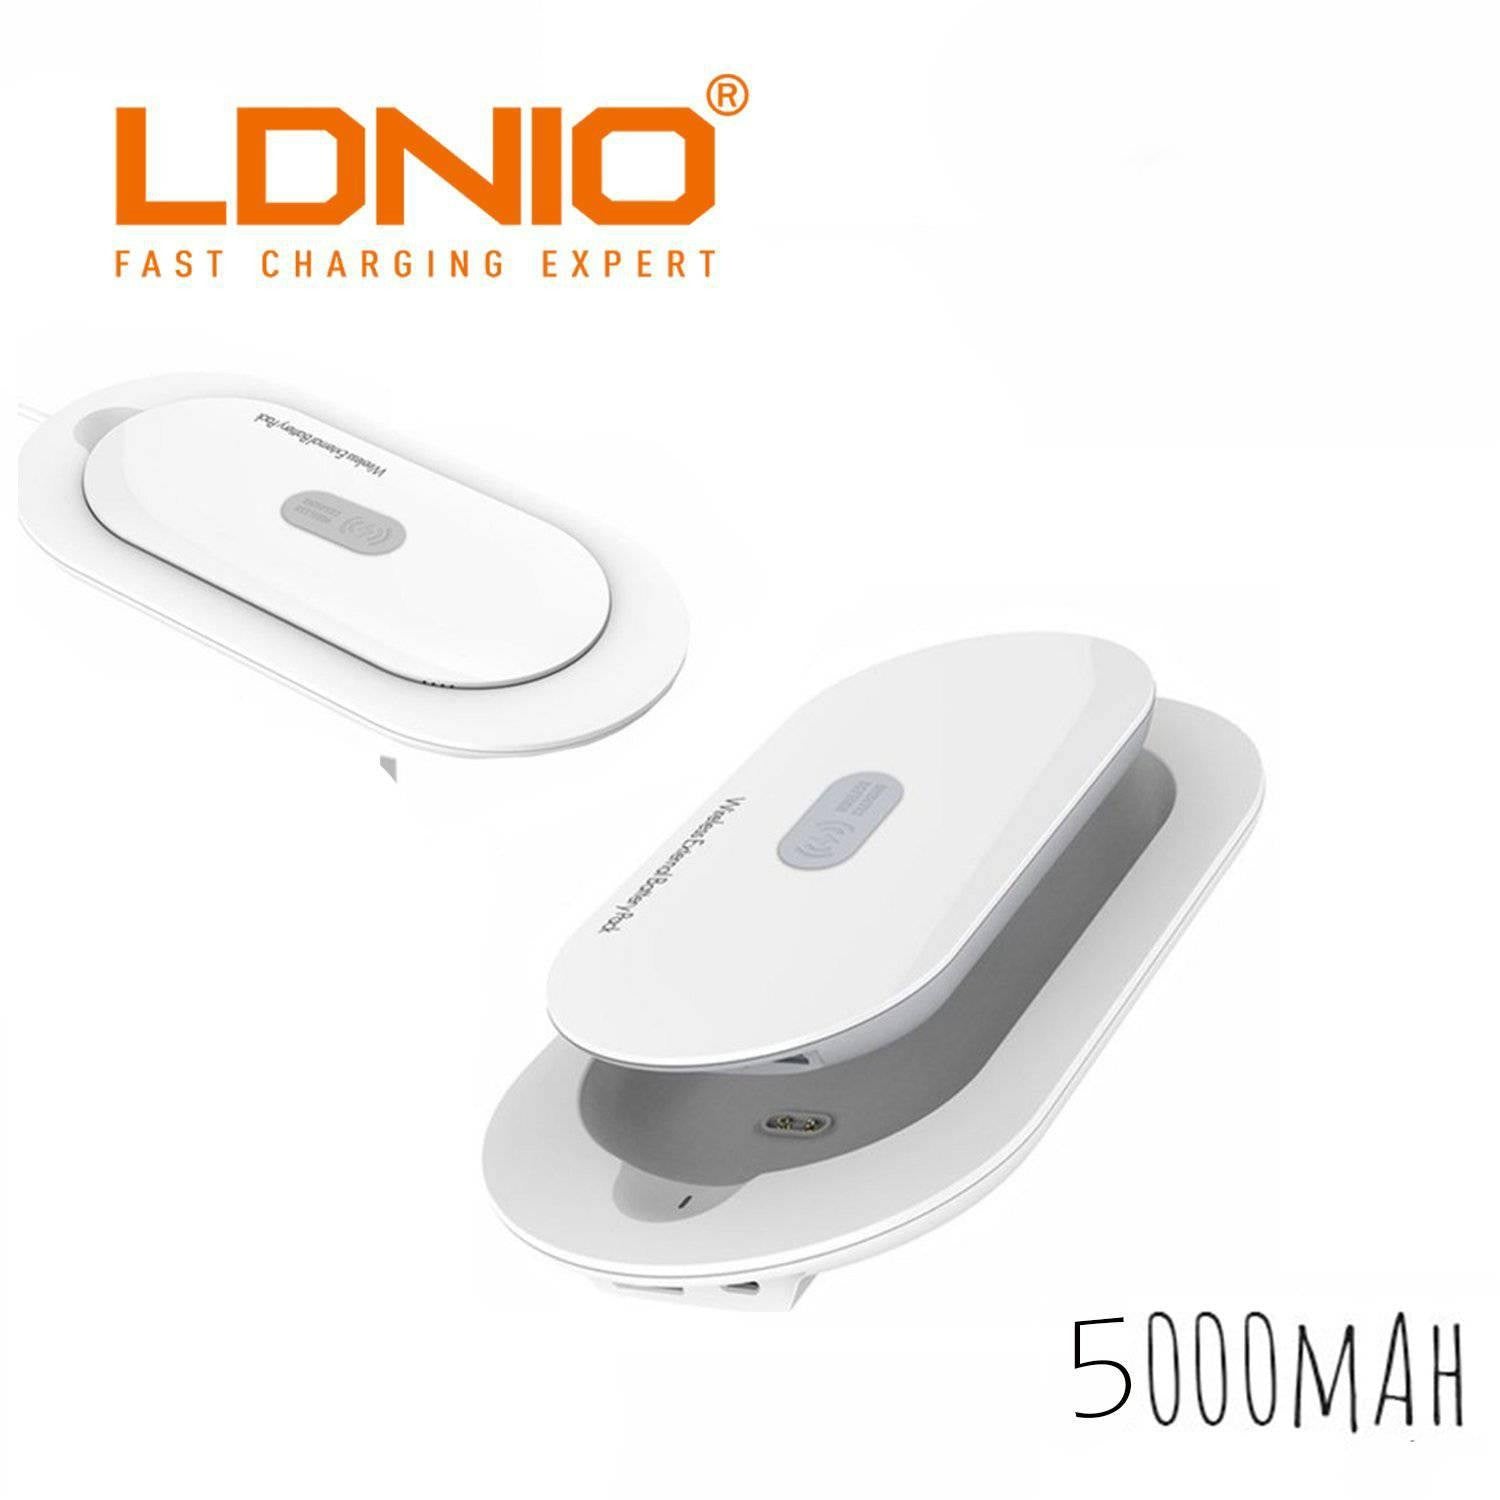 LDNIO Wireless Portable Charger 5000mAh | Shopna Online Store .